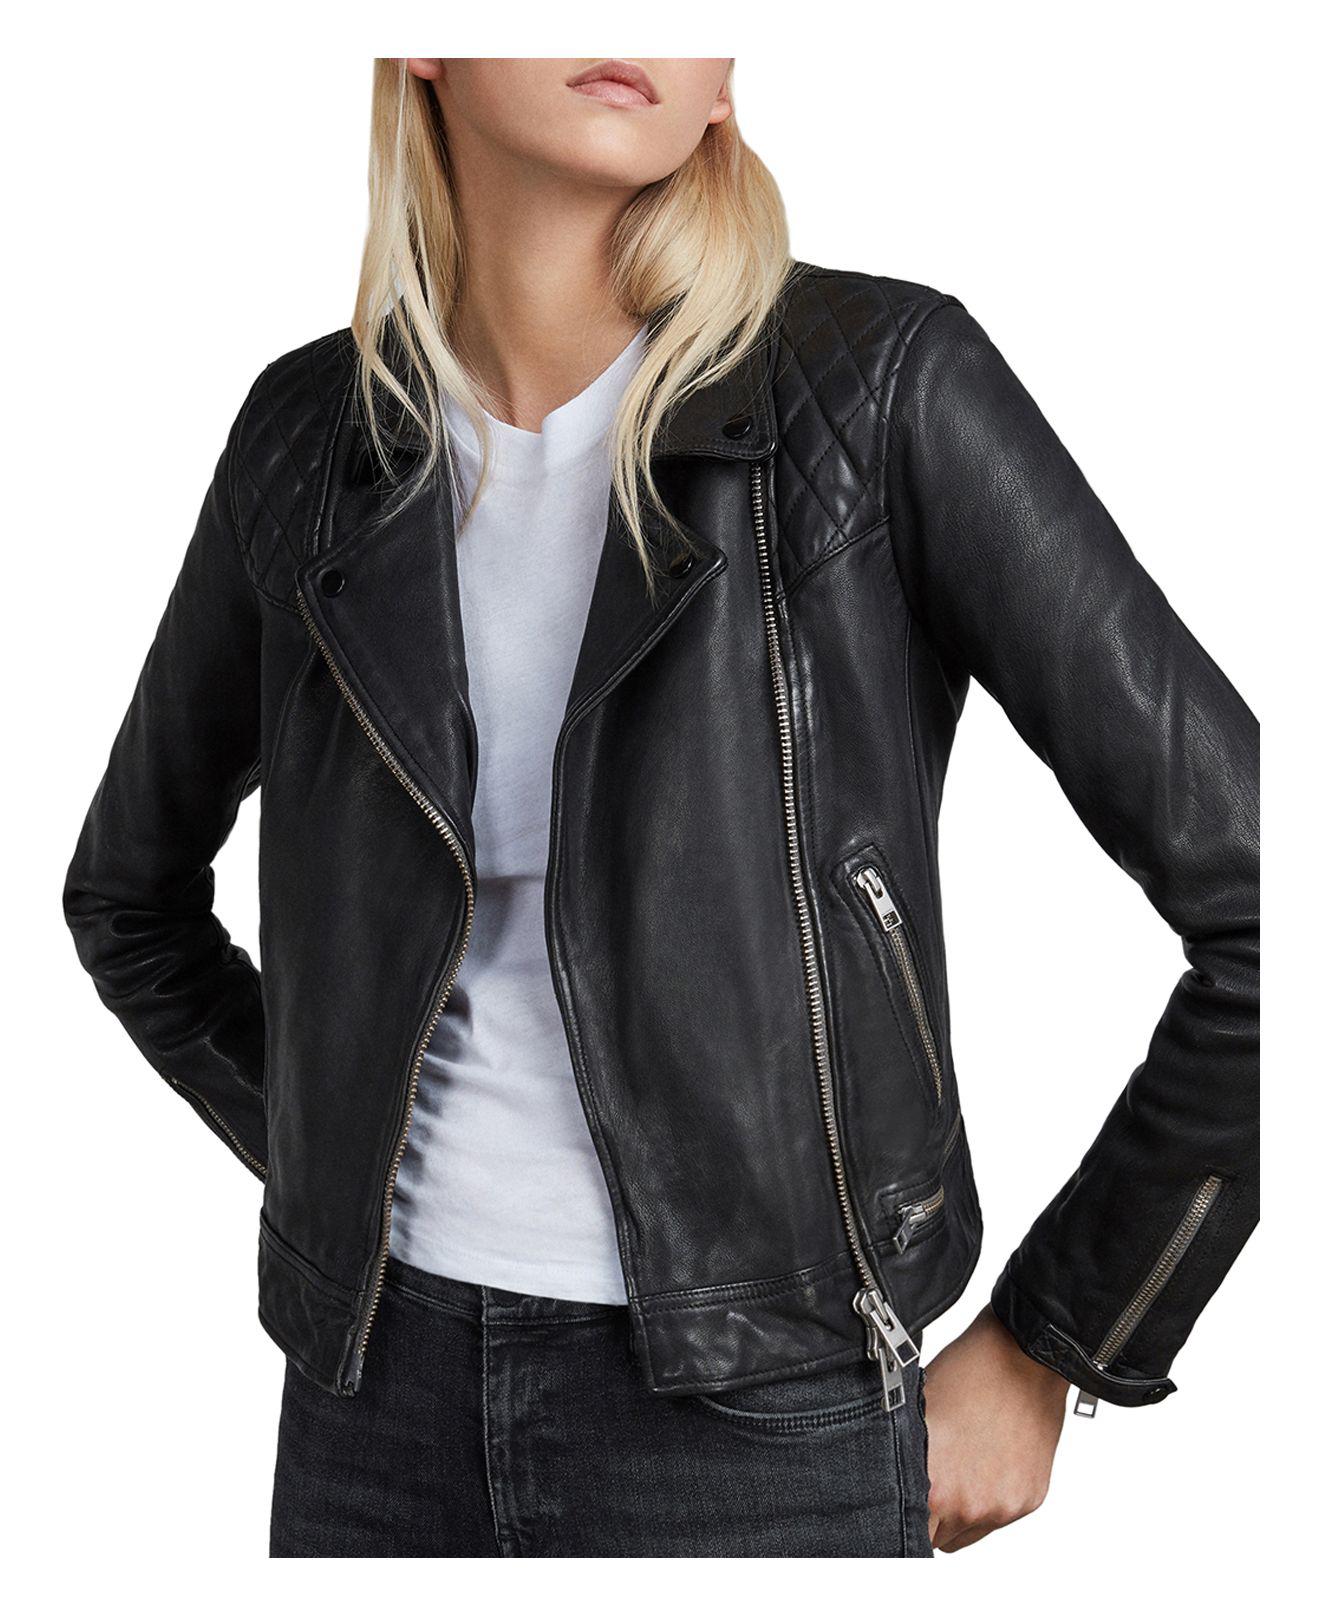 Lyst - Allsaints Conroy Quilted Leather Biker Jacket in Black